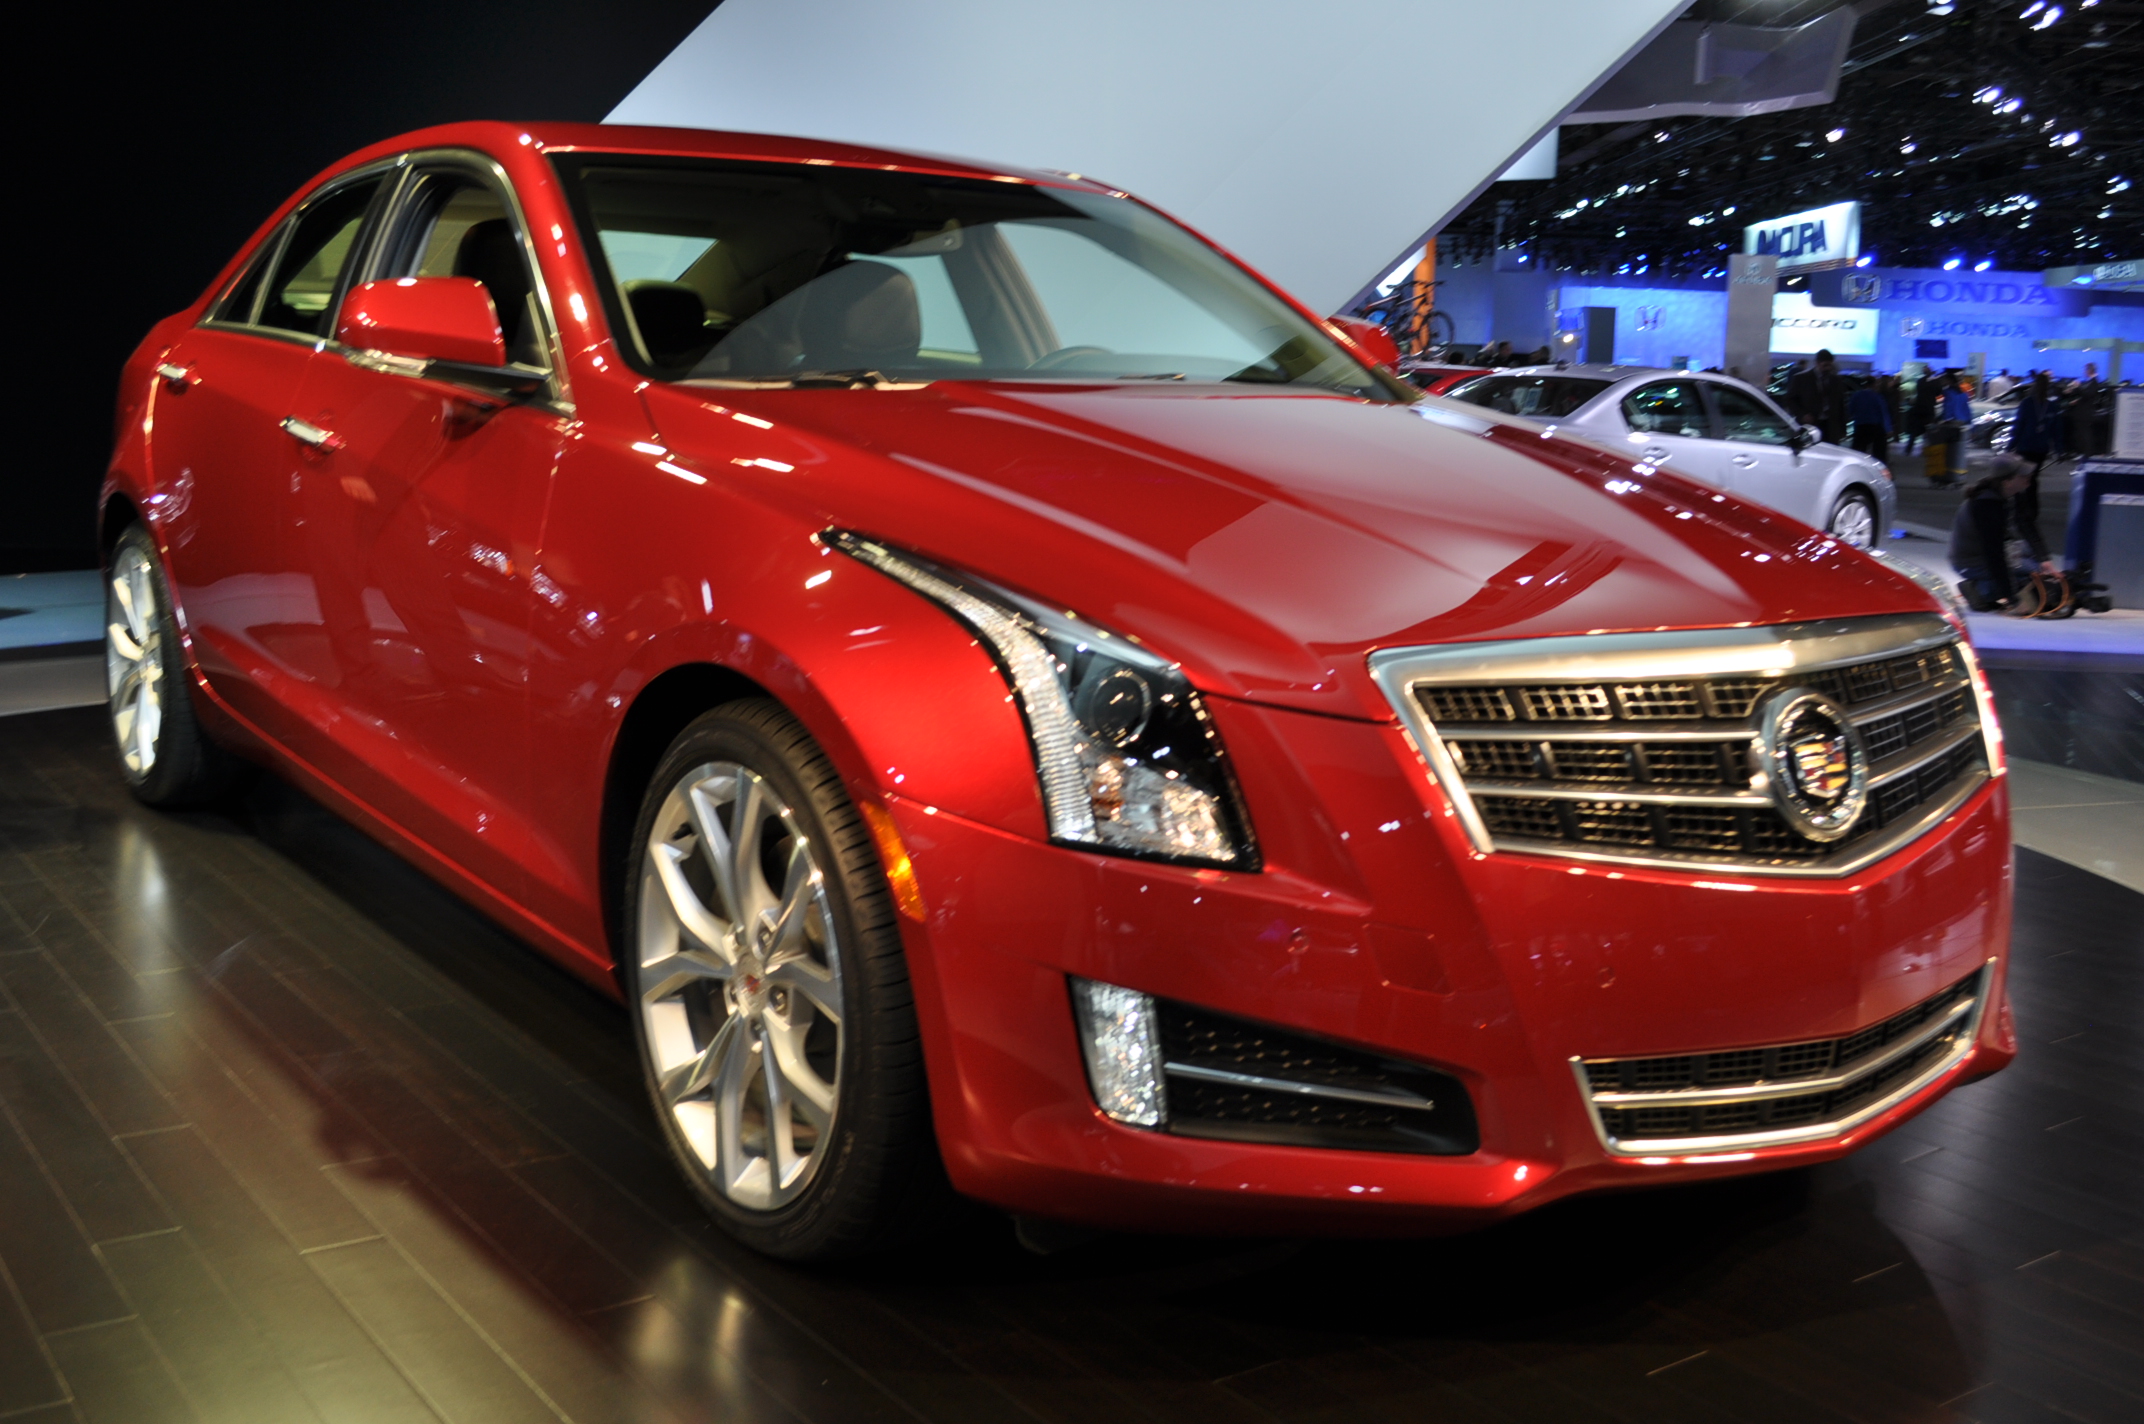 2013 Cadillac ATS: 0-60 MPH In 5.4 Seconds